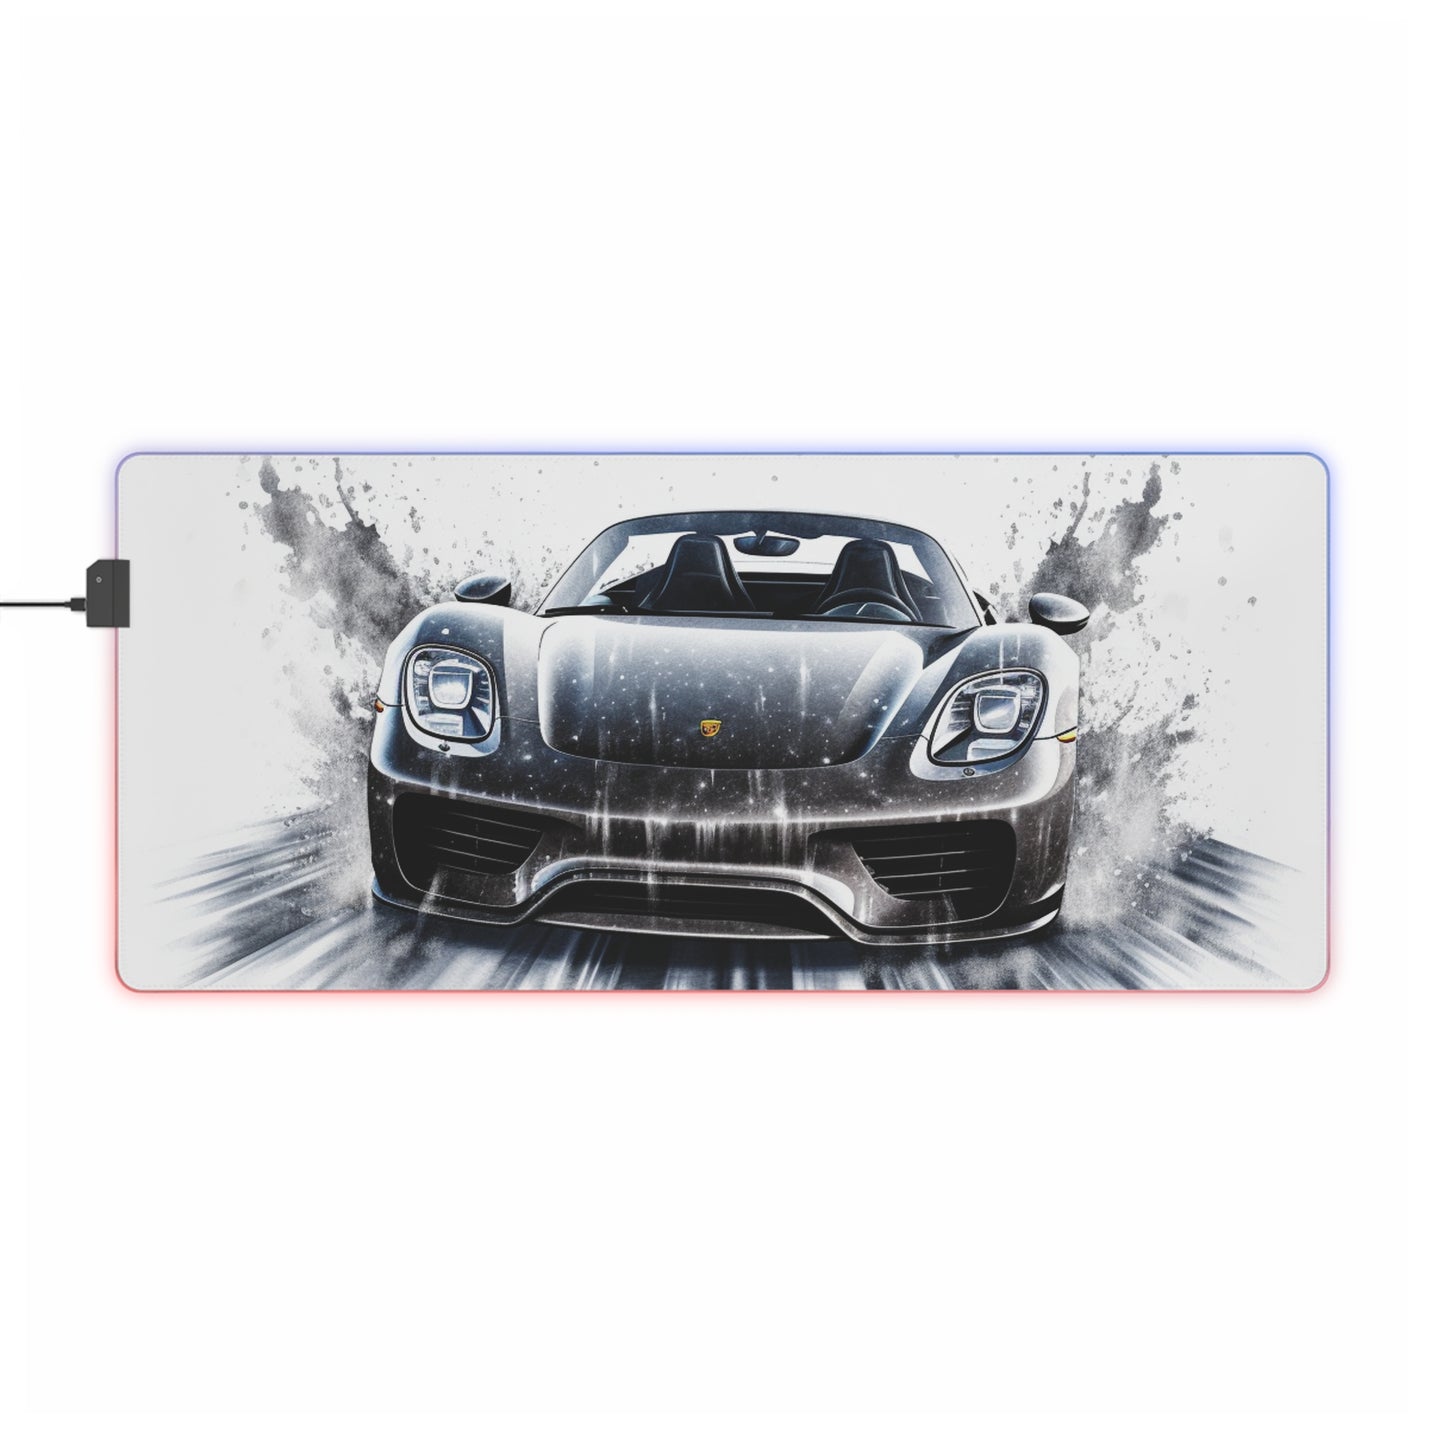 LED Gaming Mouse Pad 918 Spyder white background driving fast with water splashing 3